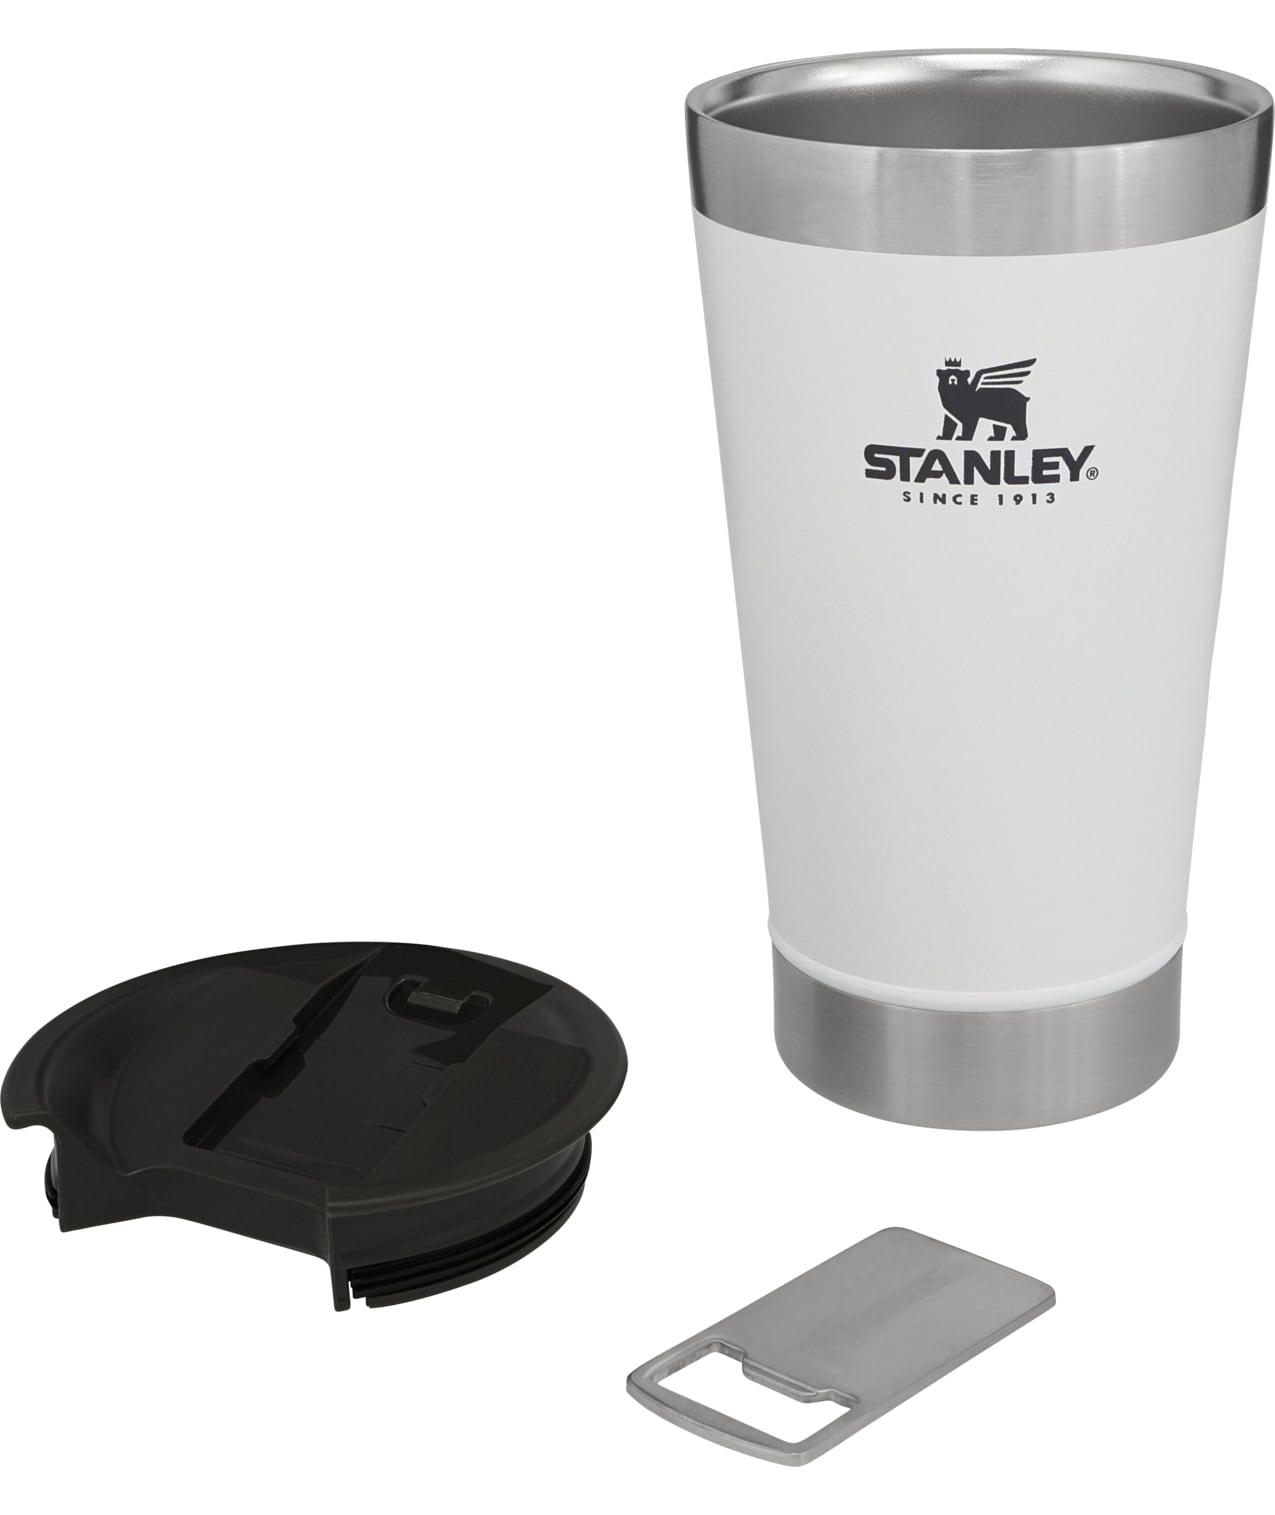 Stanley's Beer Pint Set bundles four insulated mugs at $45 ( low)